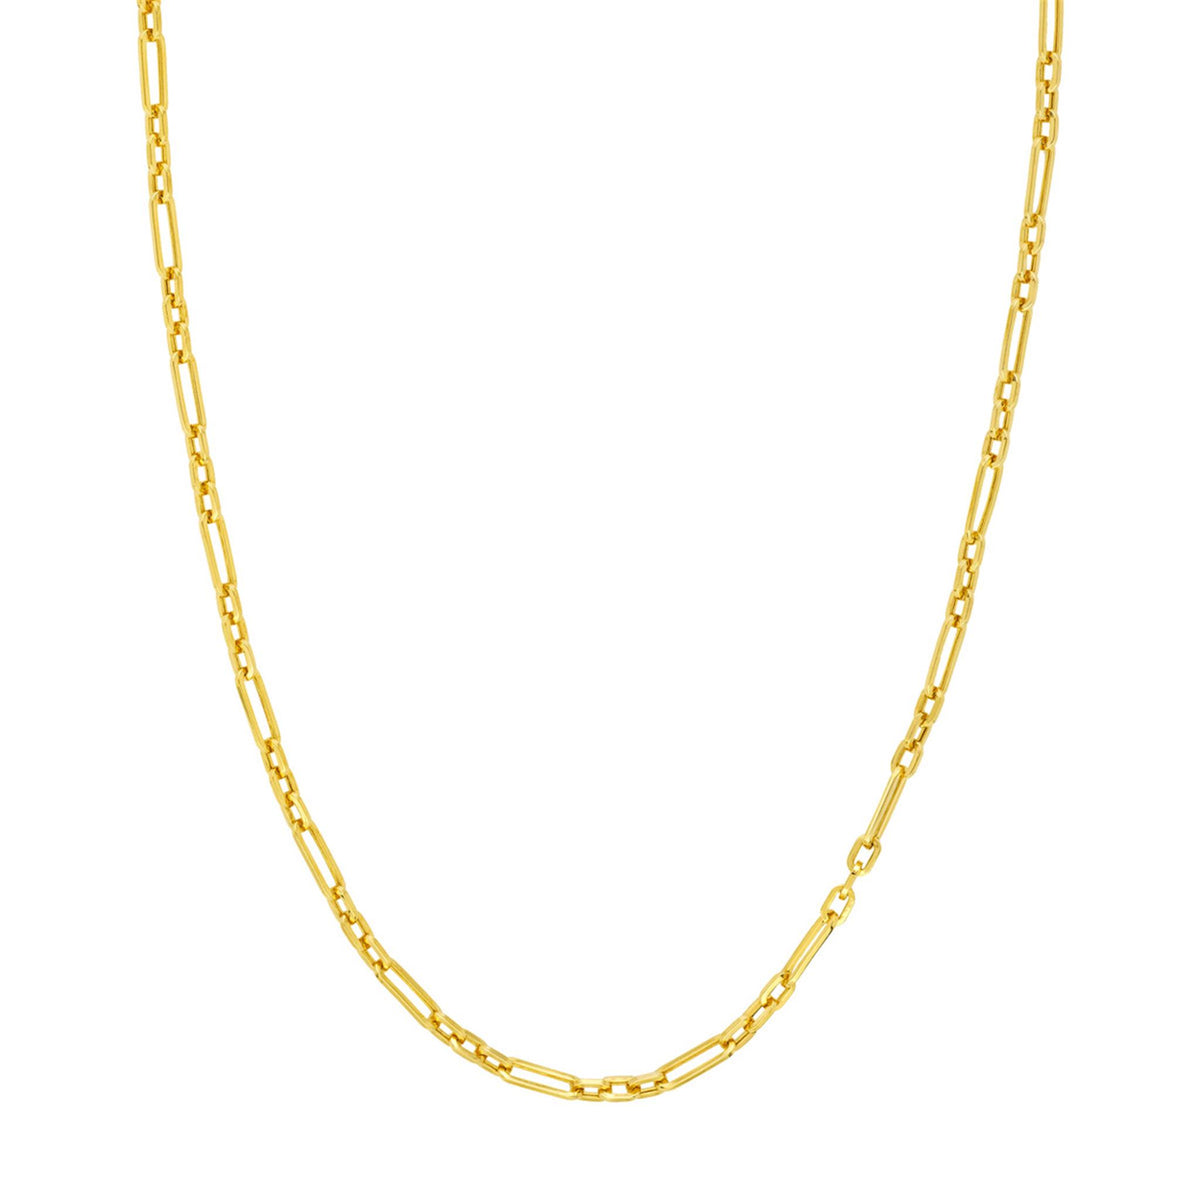 20" 14K Yellow Gold 3.9mm Figaro Paperclip Link Chain